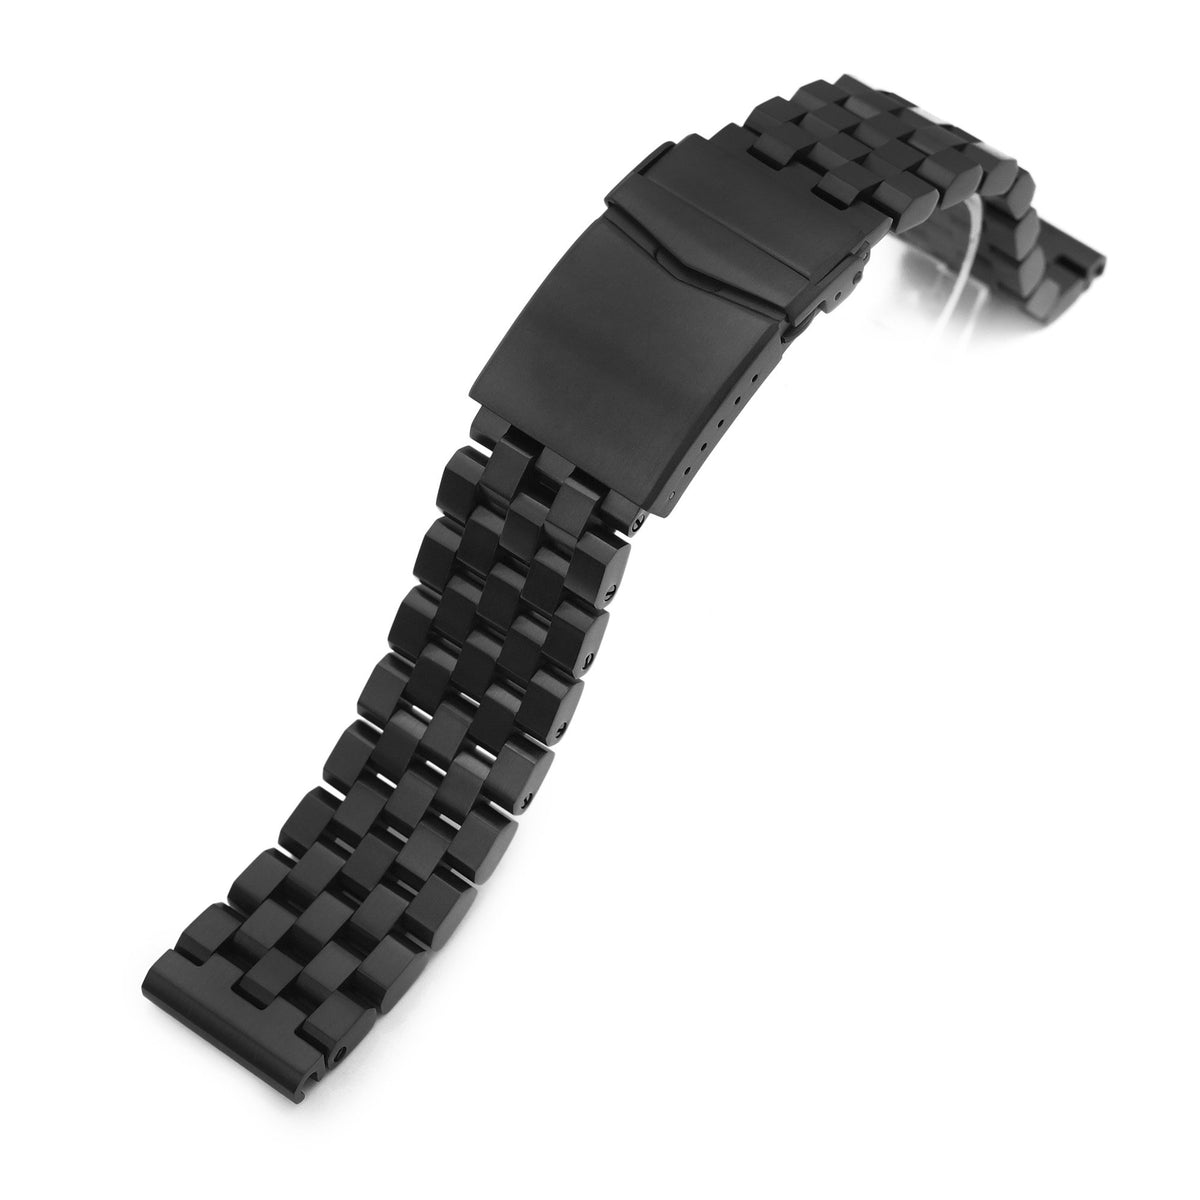 21mm Super Engineer II Watch Band for Seiko Tuna SBBN013, 316L Stainless Steel Diamond-like Carbon (DLC coating) V-Clasp Strapcode Watch Bands